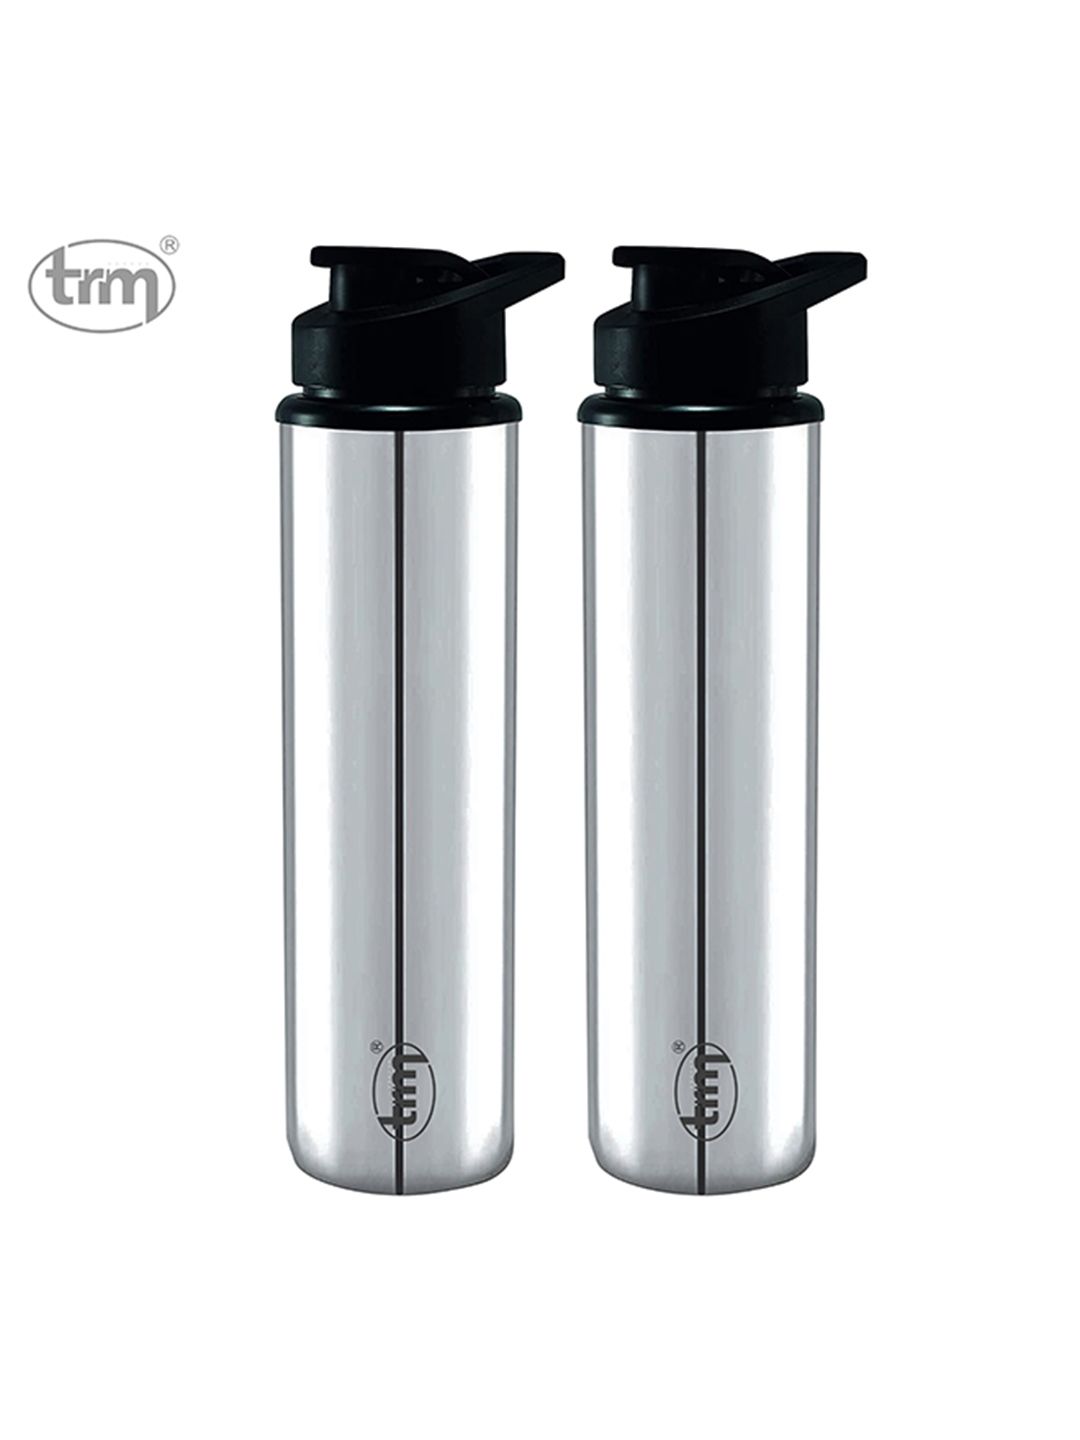 TRM Set Of 2 Solid Stainless Steel Single Wall Water Sipper Bottle Price in India